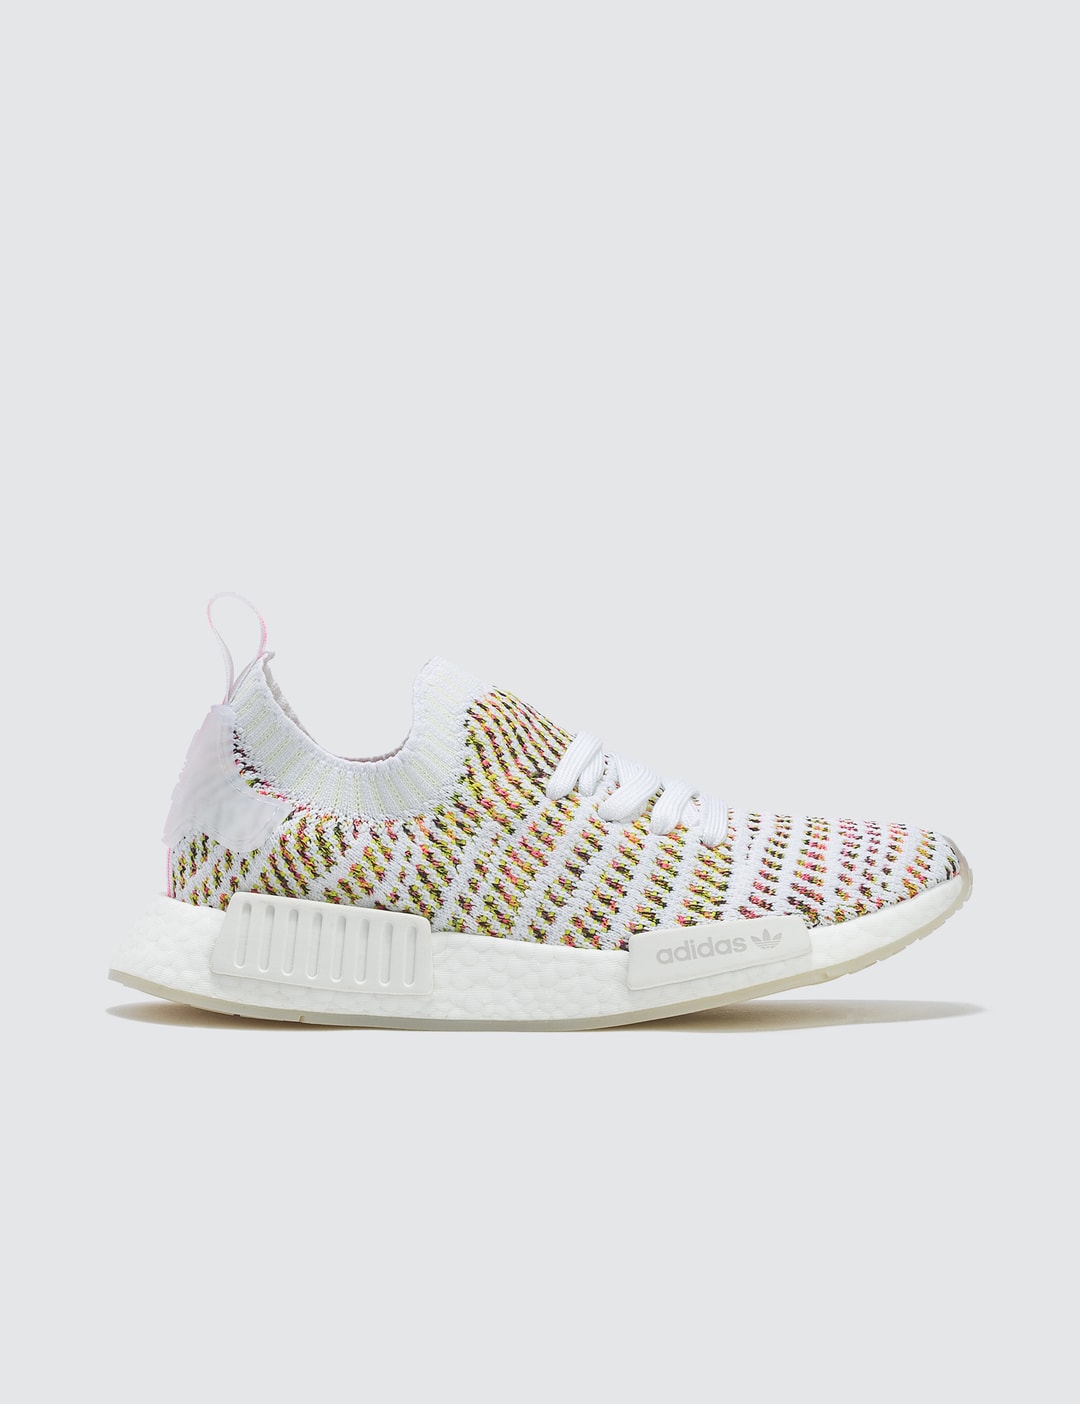 Måling overgive progressiv Adidas Originals - NMD CS1 PK W | HBX - Globally Curated Fashion and  Lifestyle by Hypebeast